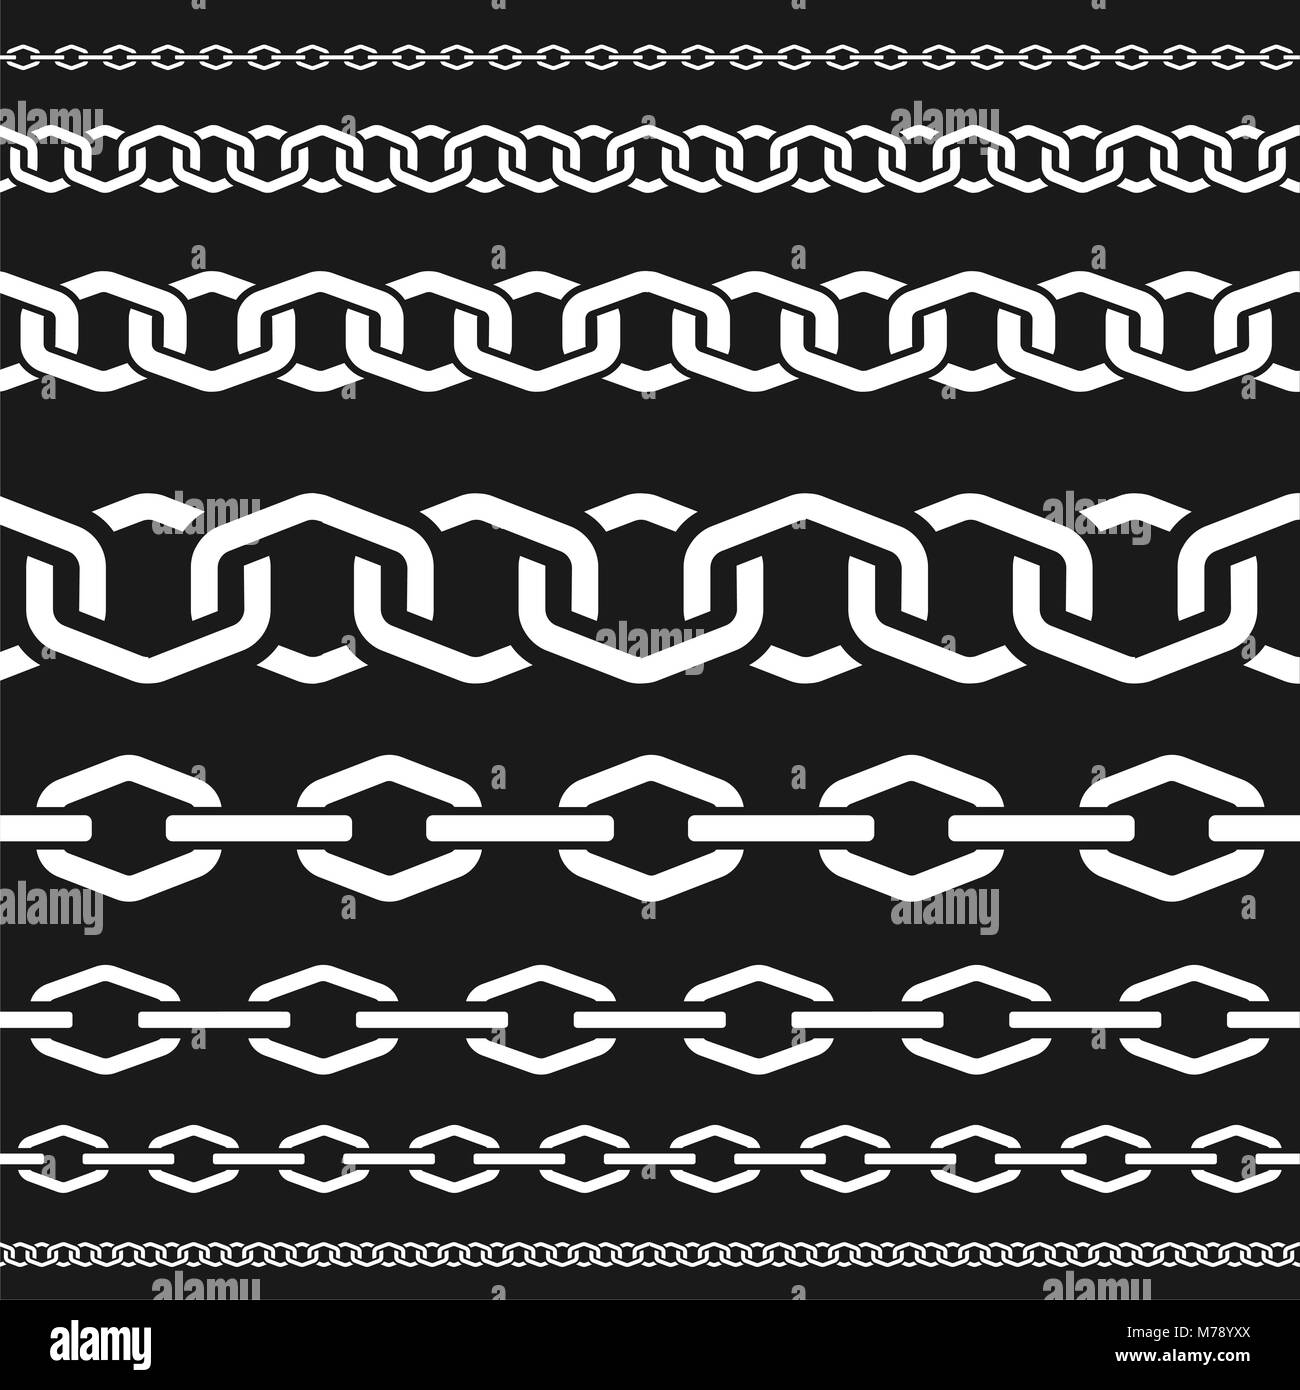 Different scale chains, protection seamless pattern, fencing white vector design element silhouette vector illustration on black background. Stock Vector